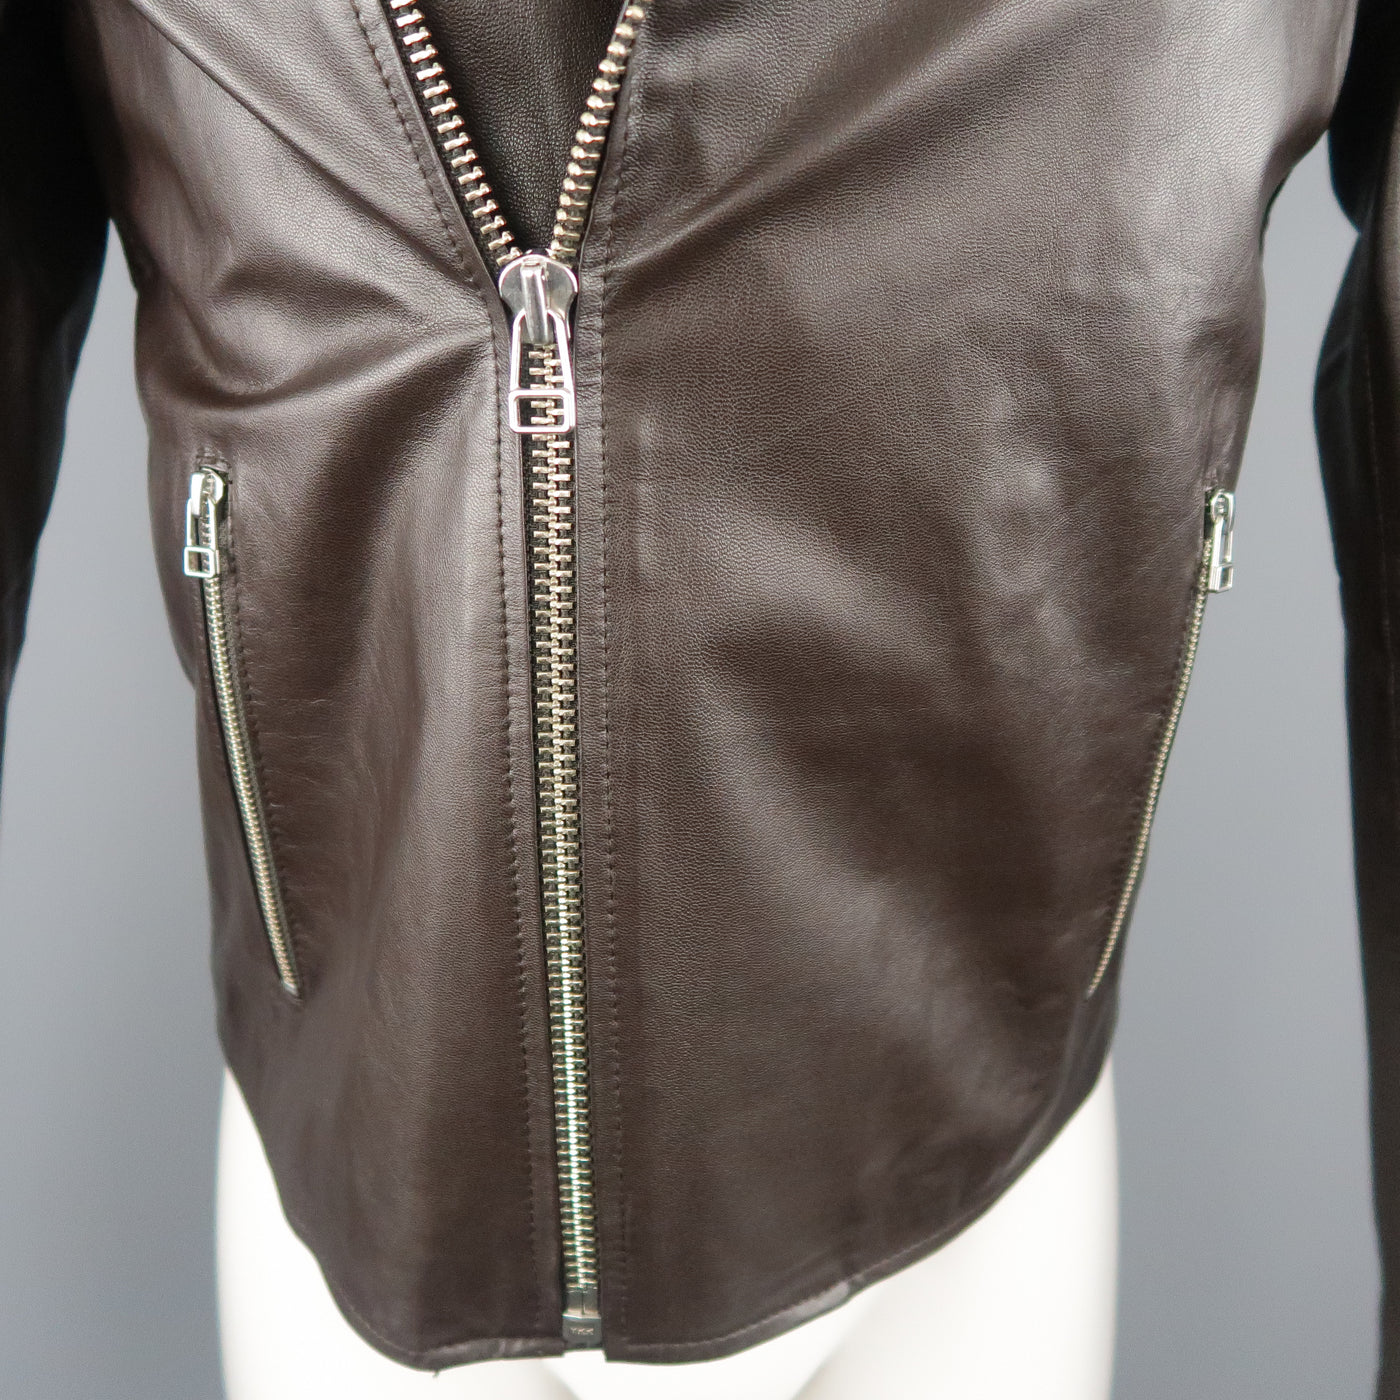 SHIPLEY and HALMOS S Brown Leather Biker Jacket